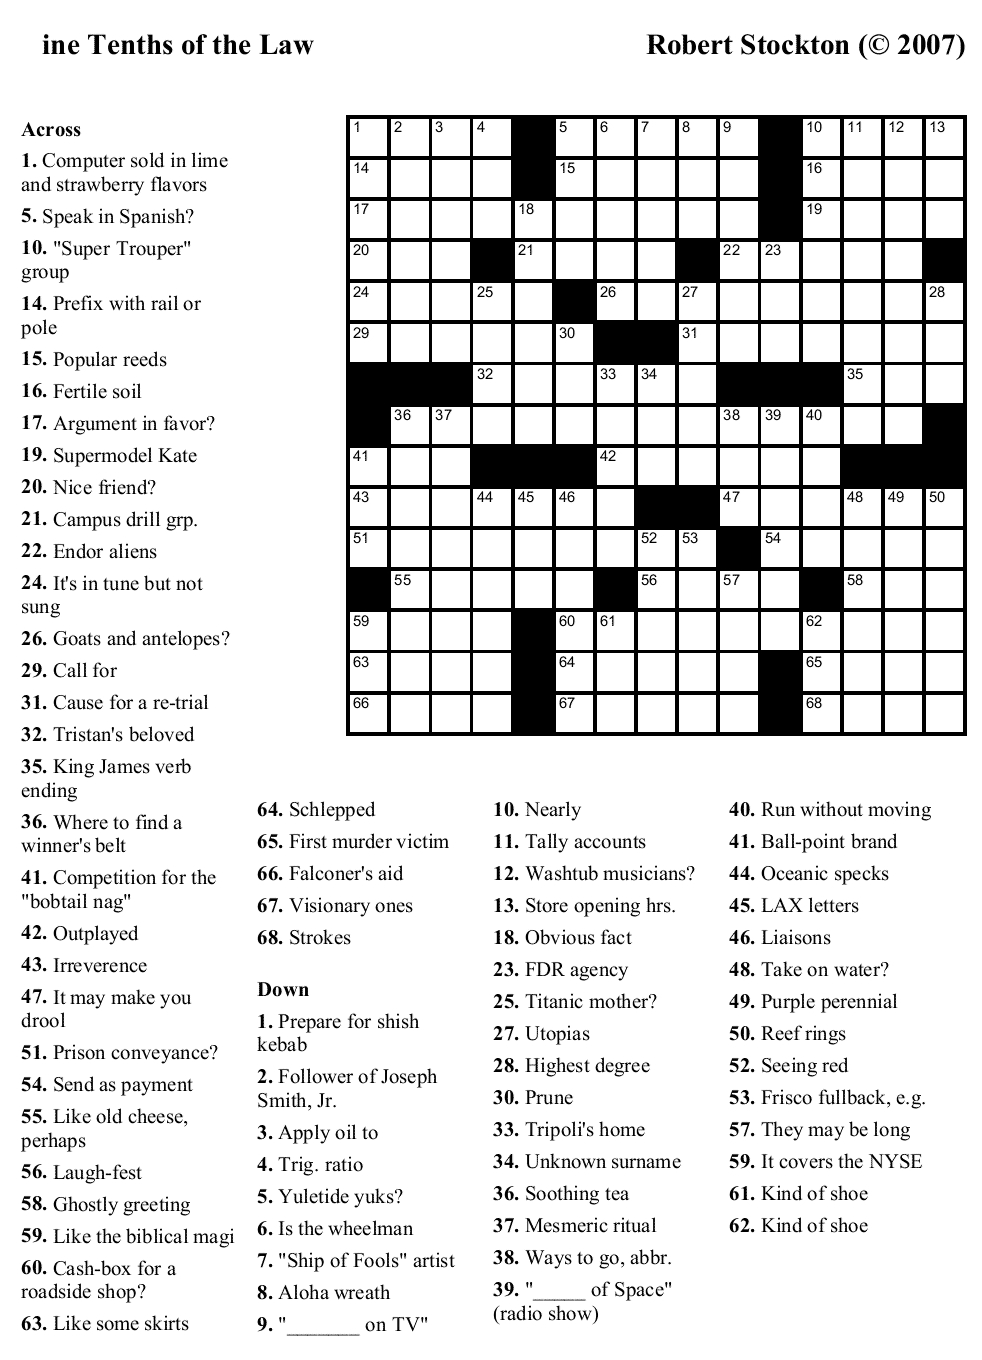 Crossword Puzzles Printable - Yahoo Image Search Results | Crossword - Printable Crossword Puzzles With Solutions